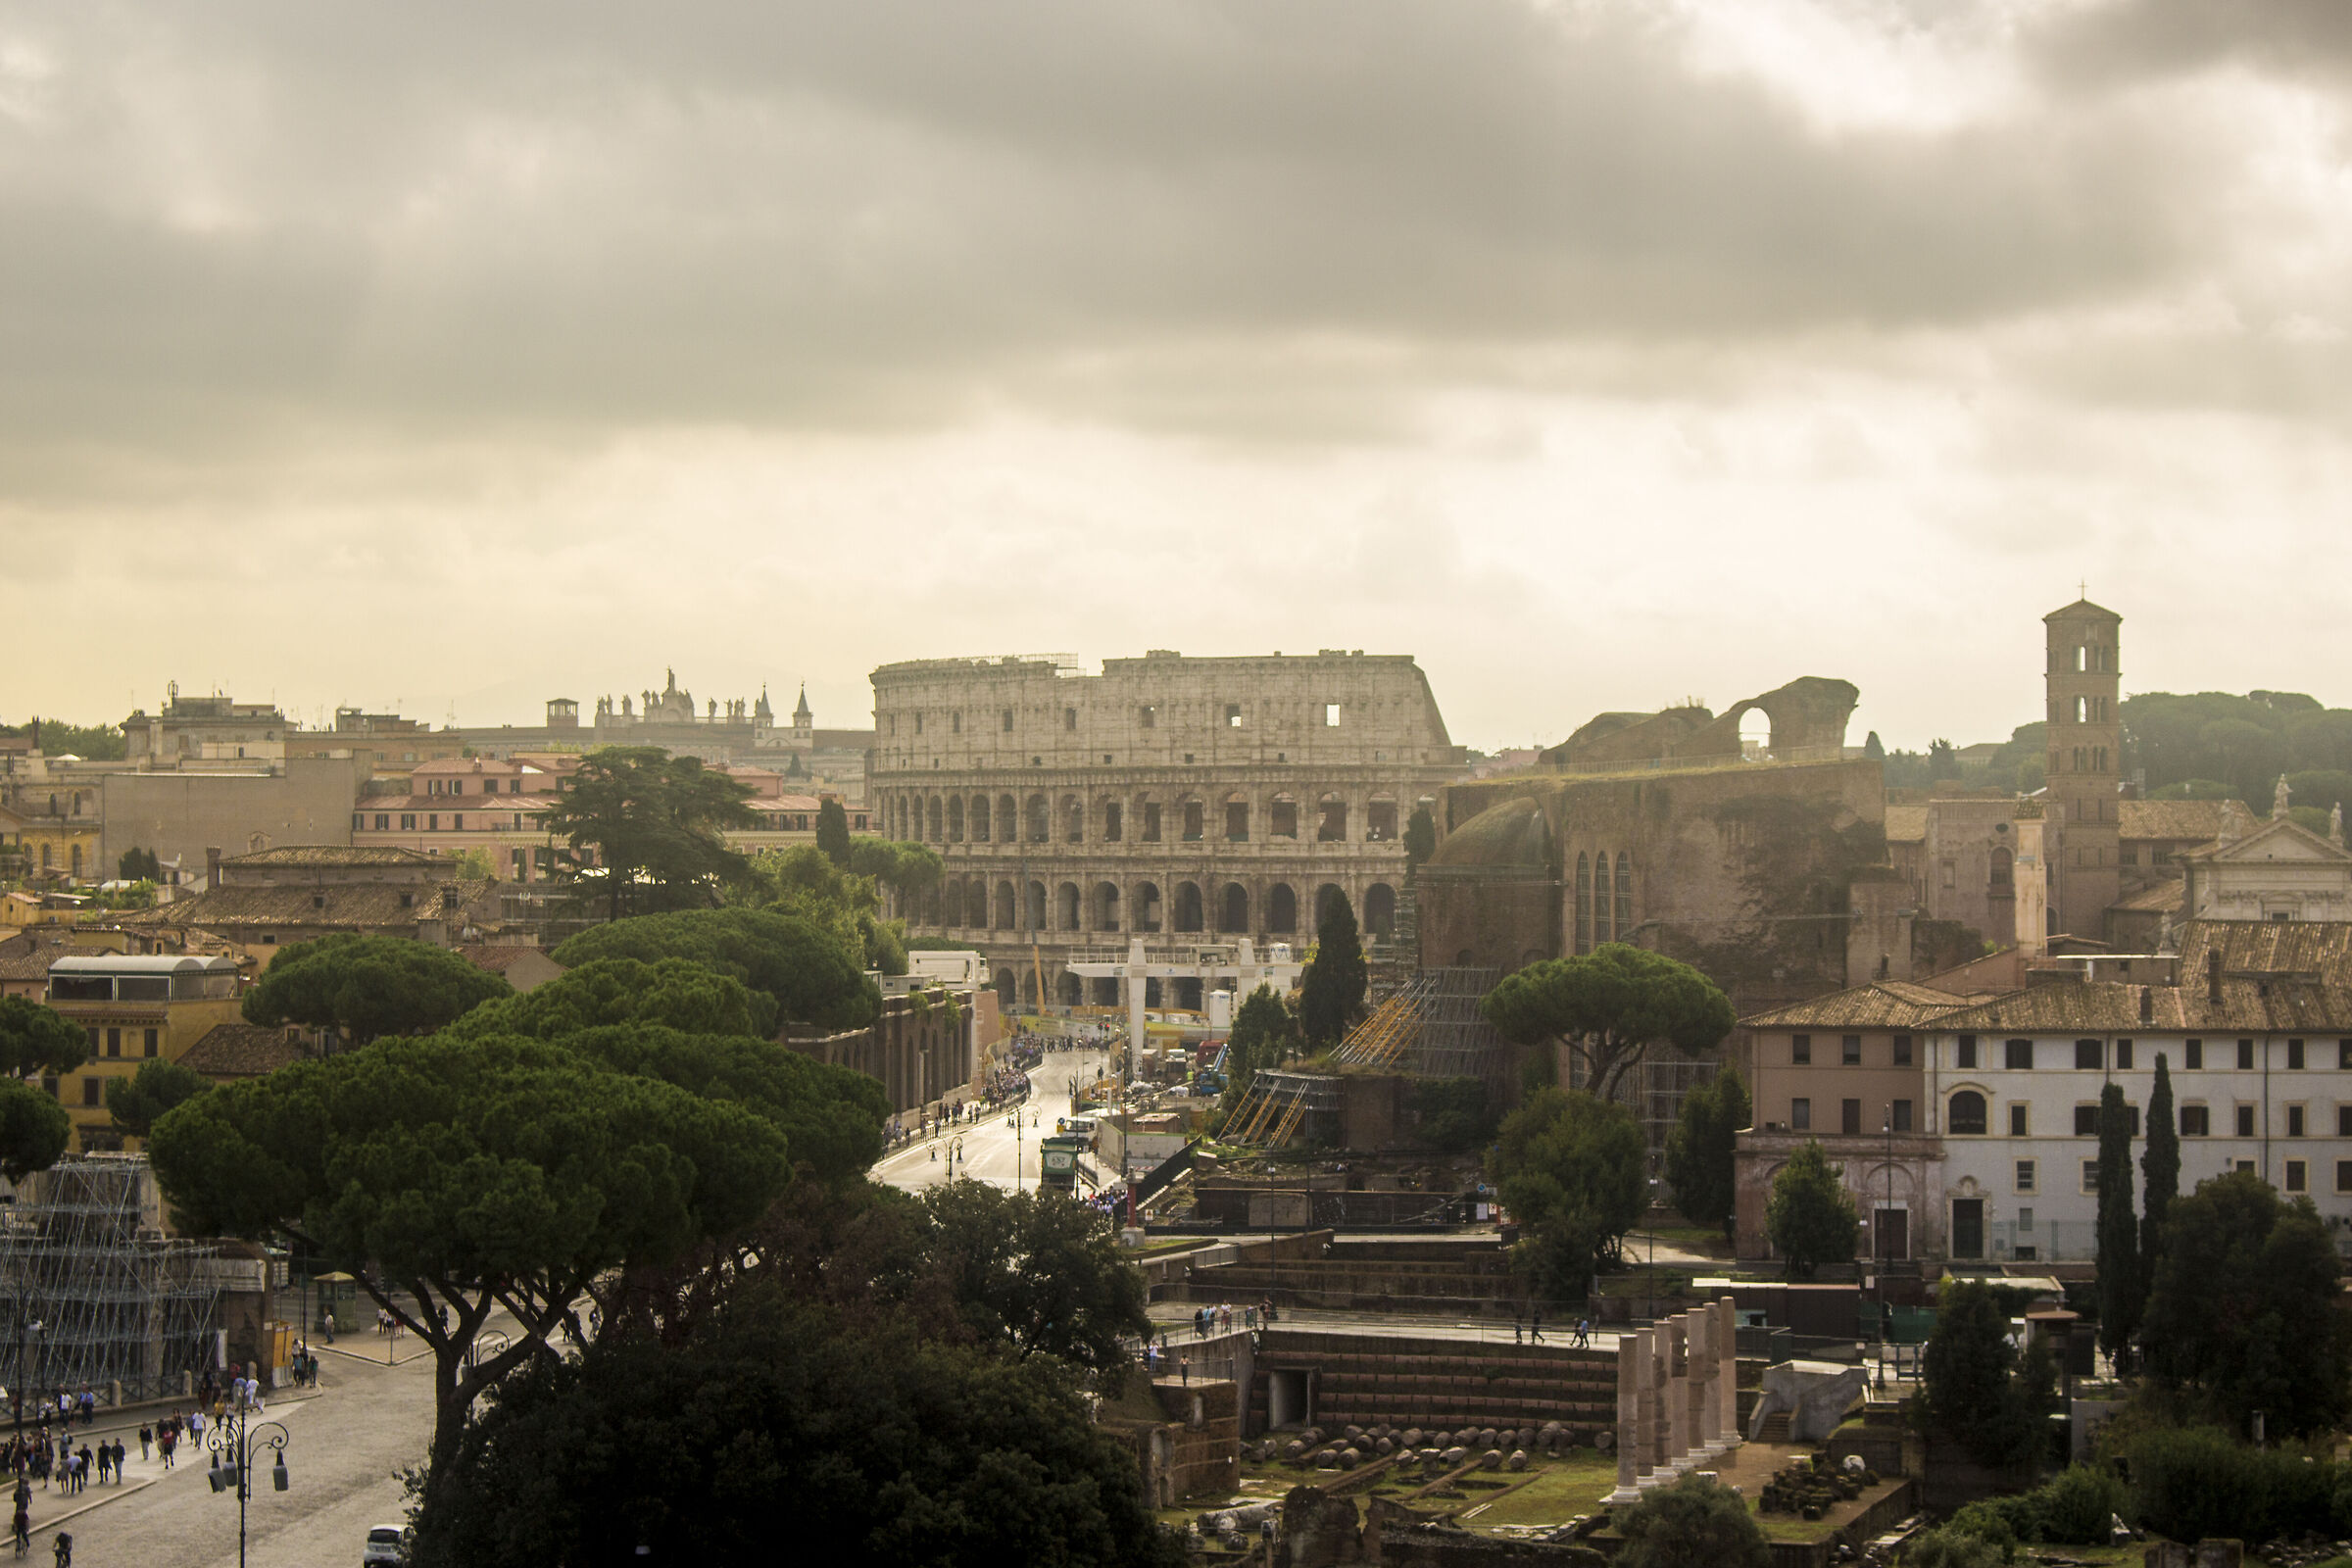 View of the Colosseum...